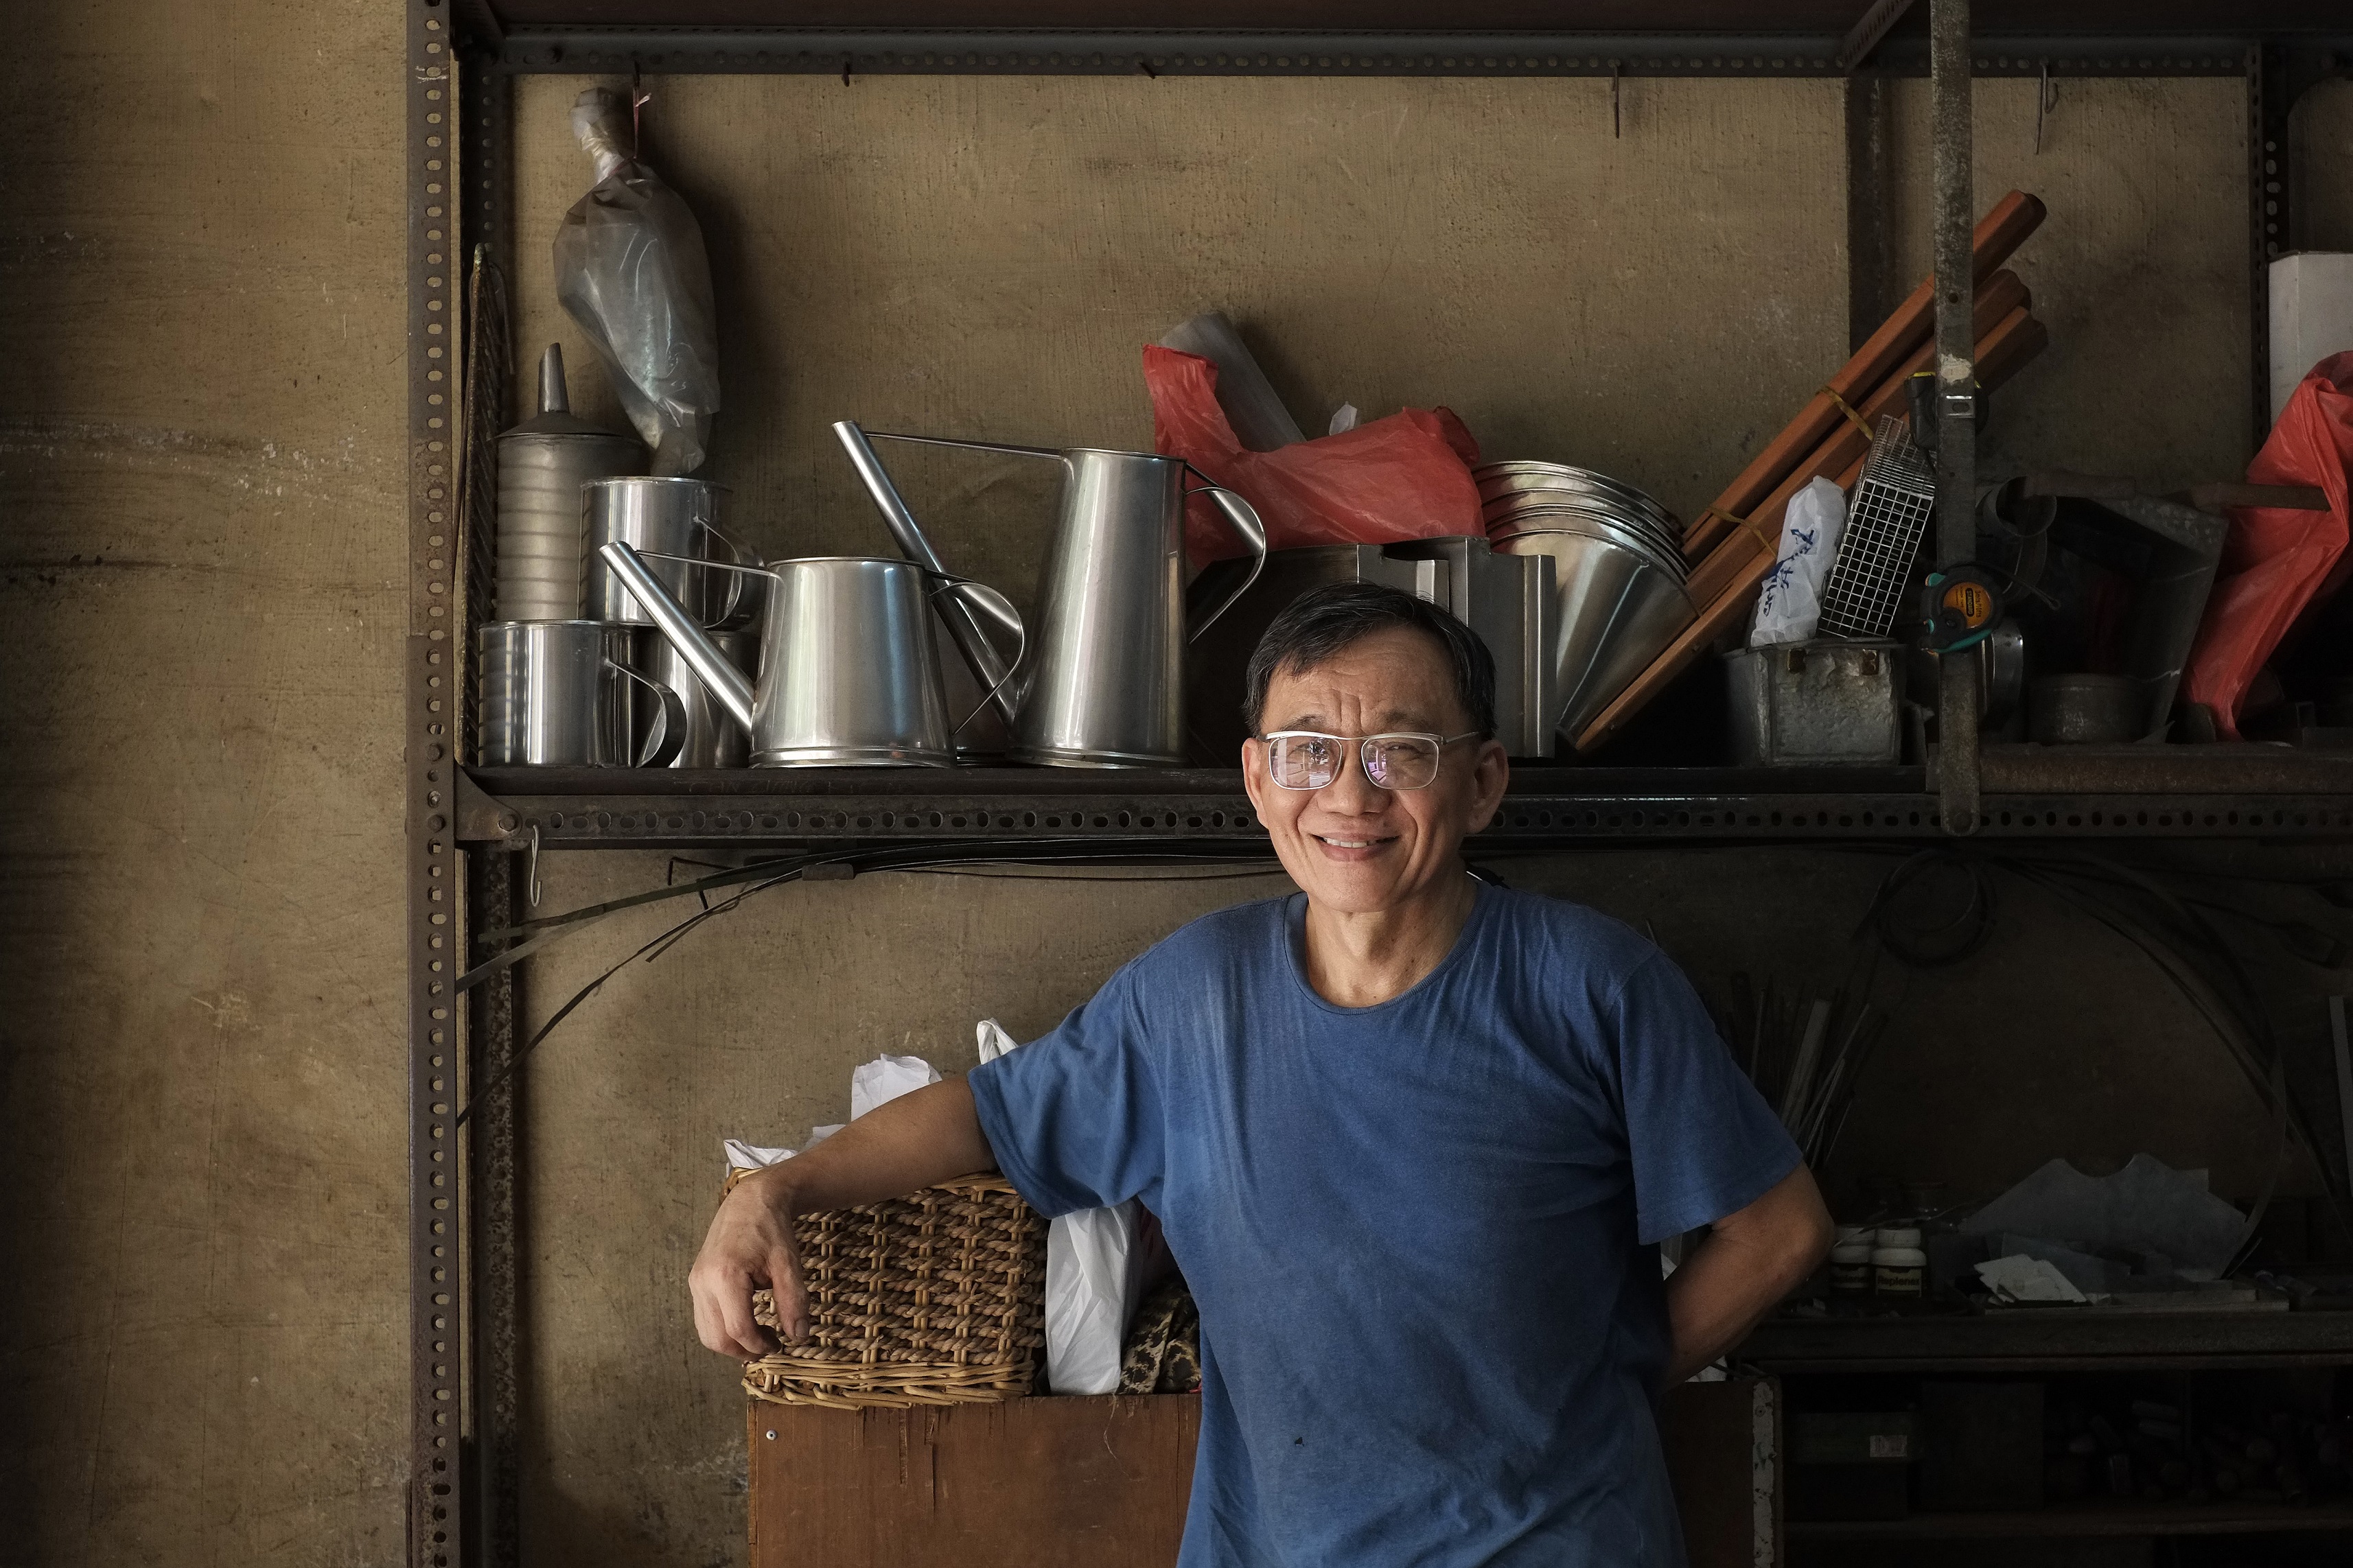 STANDING PROUD: Jimmy poses at ease with various metal kopi tins and tools                     